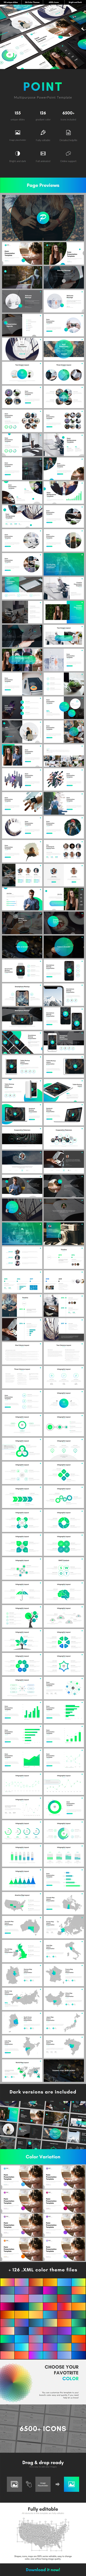 Point Multipurpose PowerPoint Template